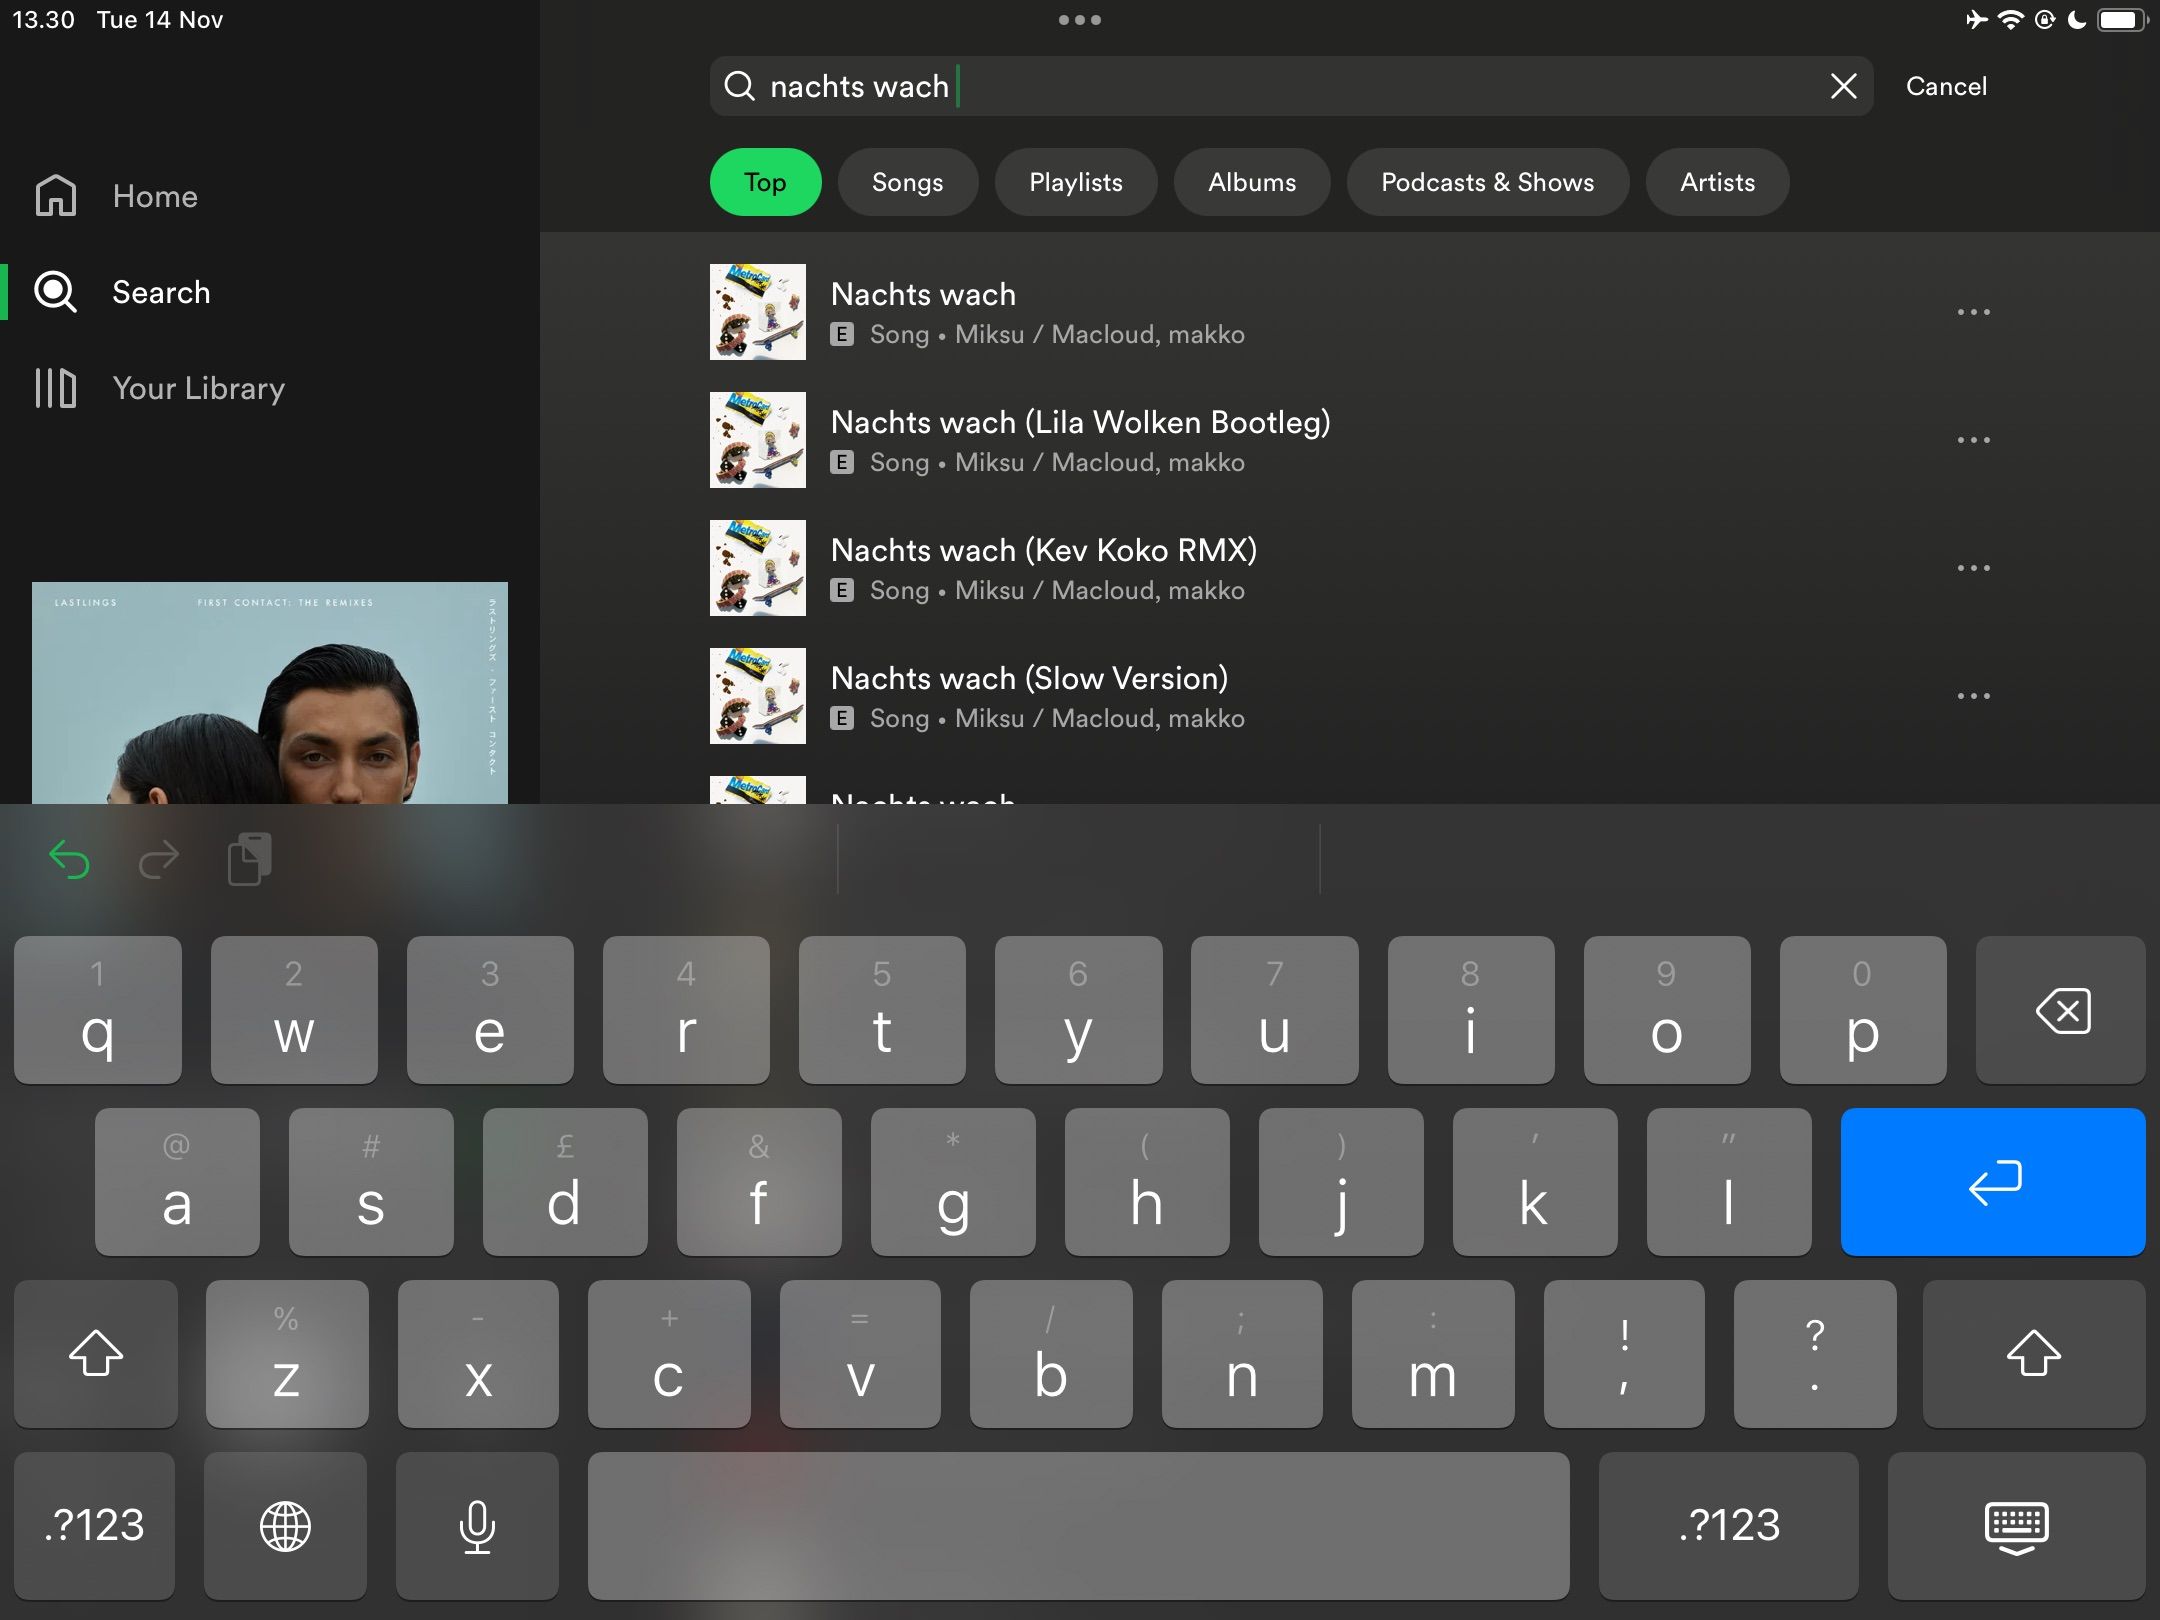 The Different Search Features in Spotify